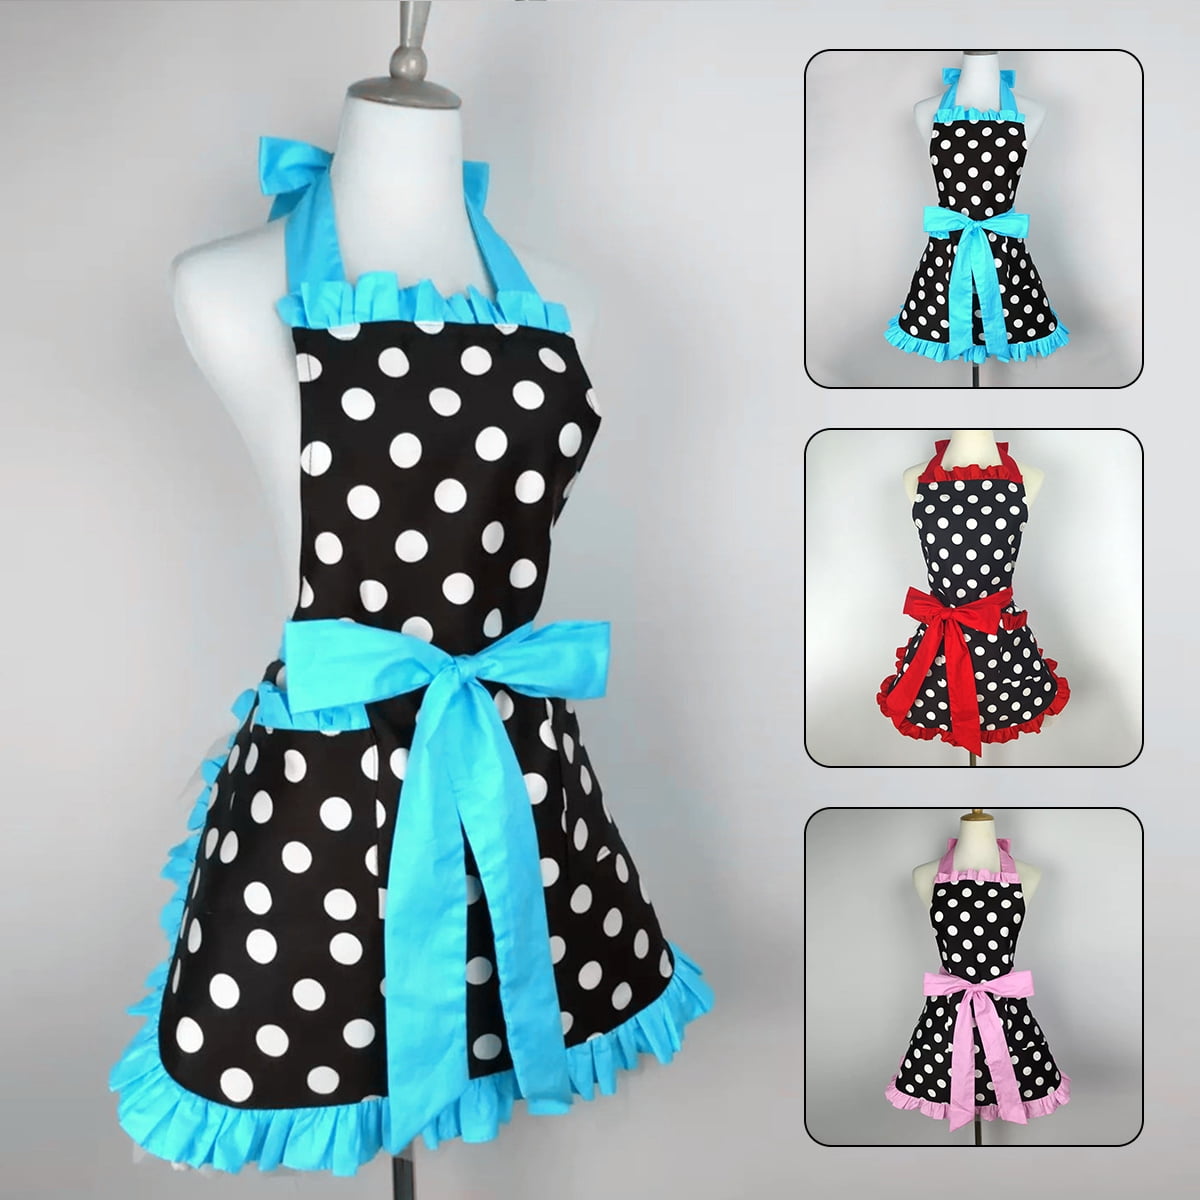 Aspire Women Full Apron with 2 Pockets Tie Back Retro Polka Dot for Cafe Kitchen 